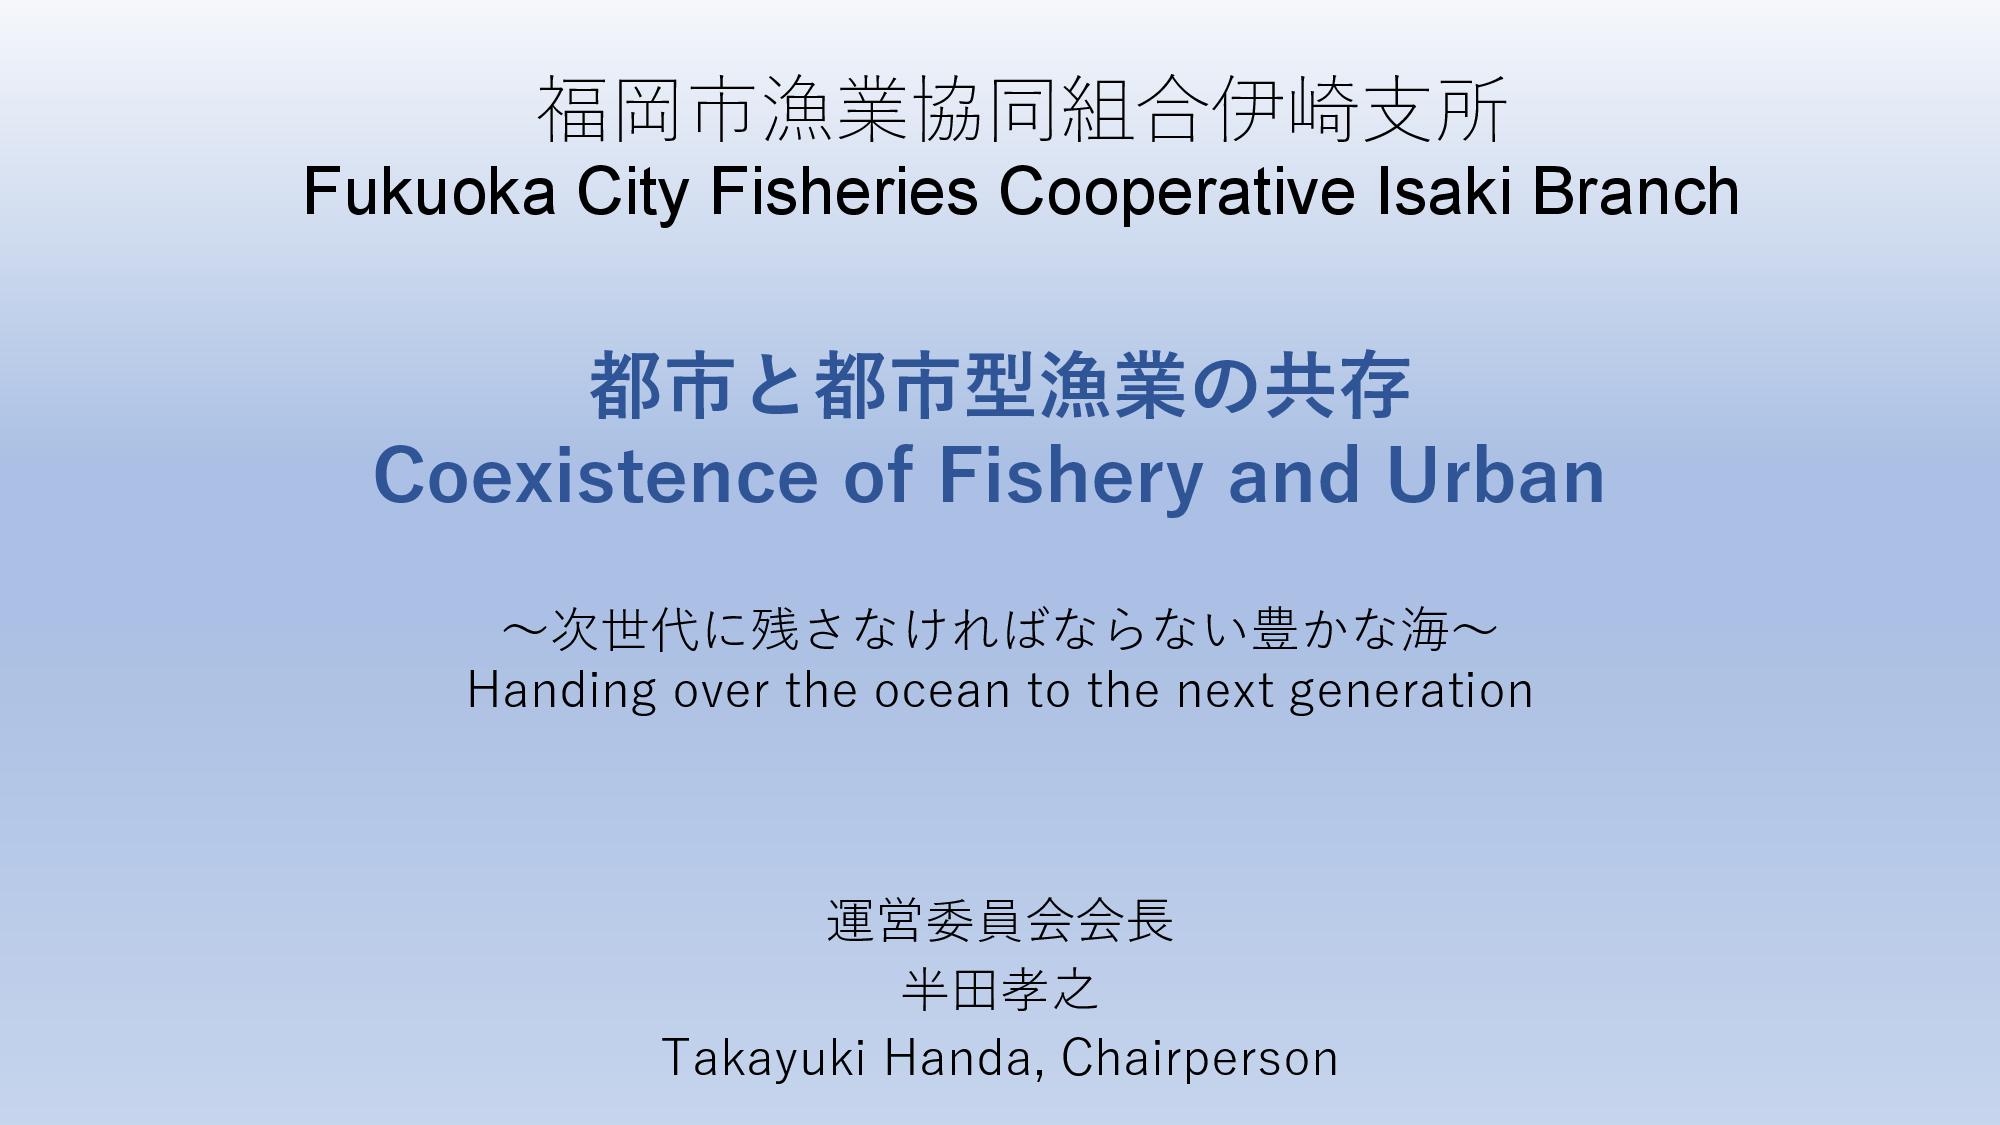 Coexistence of Fishery and Urban / 都市と都市型漁業の共存: Expert Group Meeting 2019